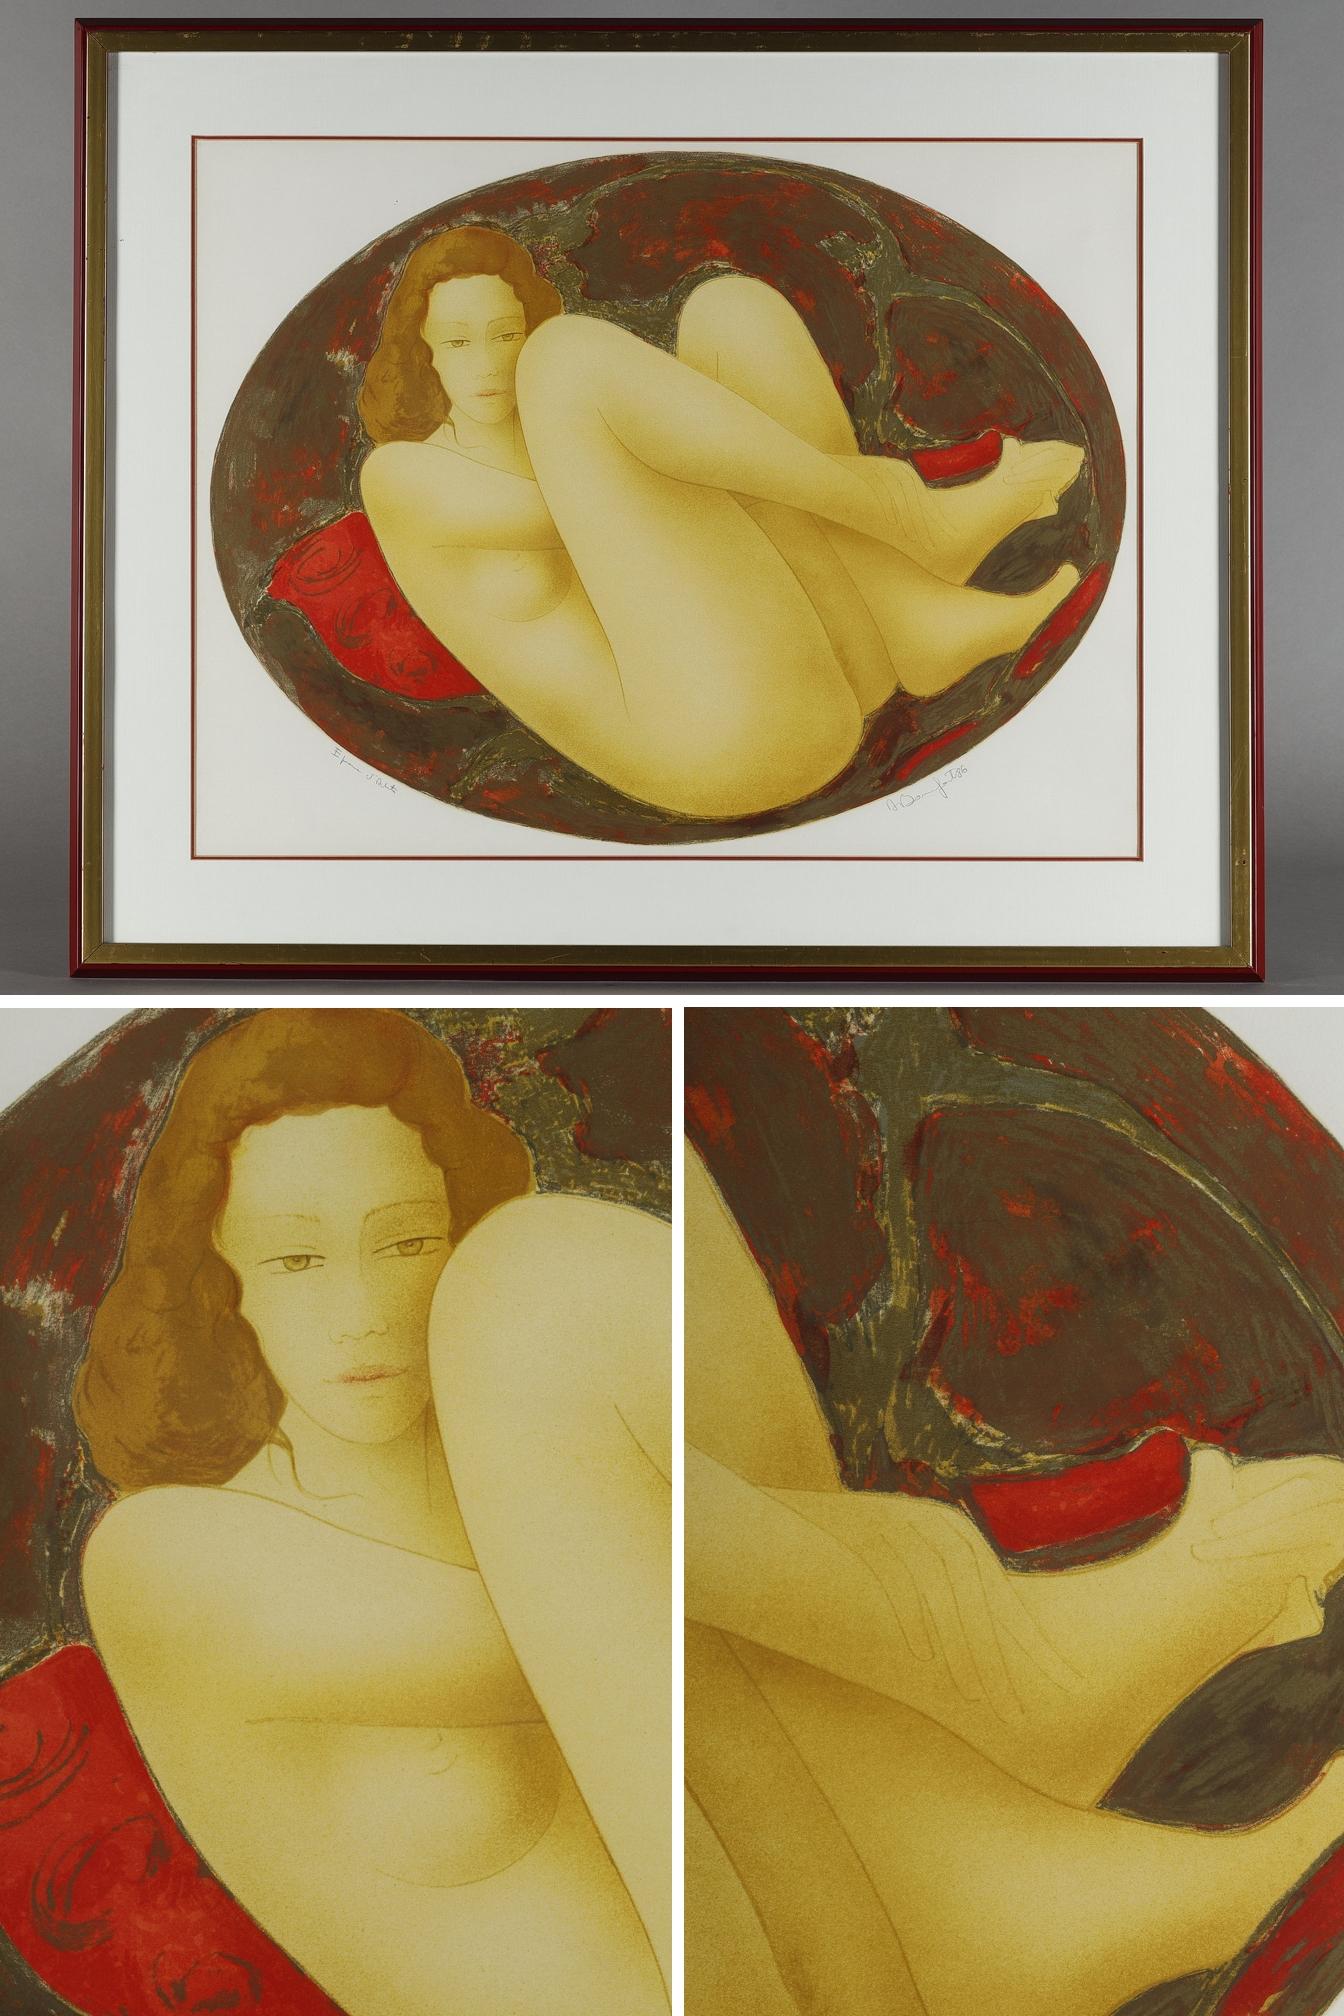 Nude woman lying on a bed. Lithograph dated 1986 and signed 